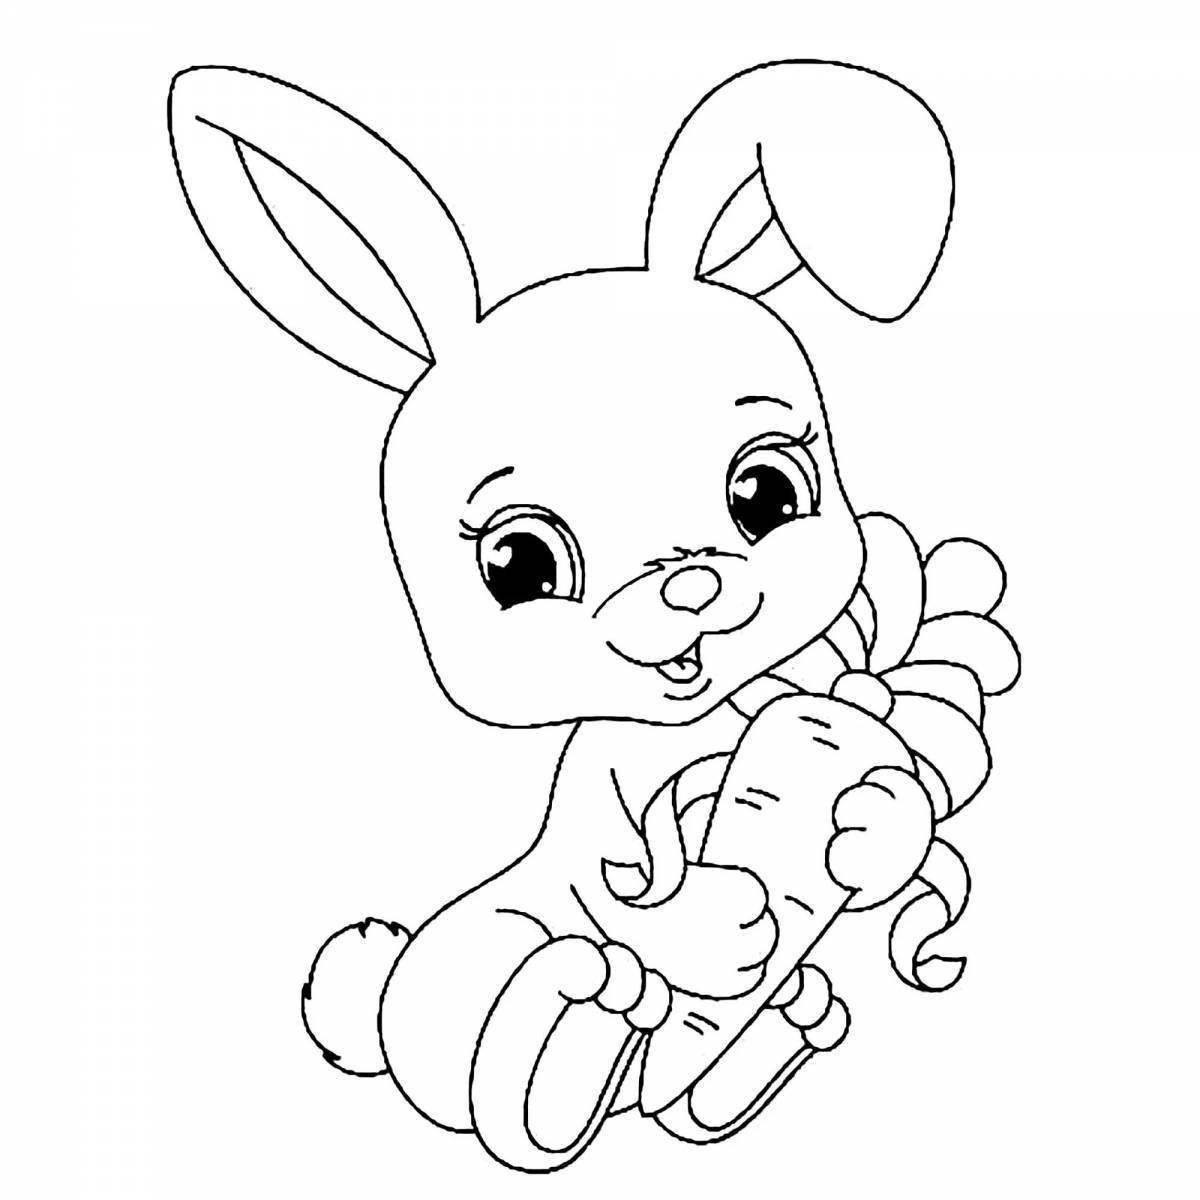 Cat and bunny #5